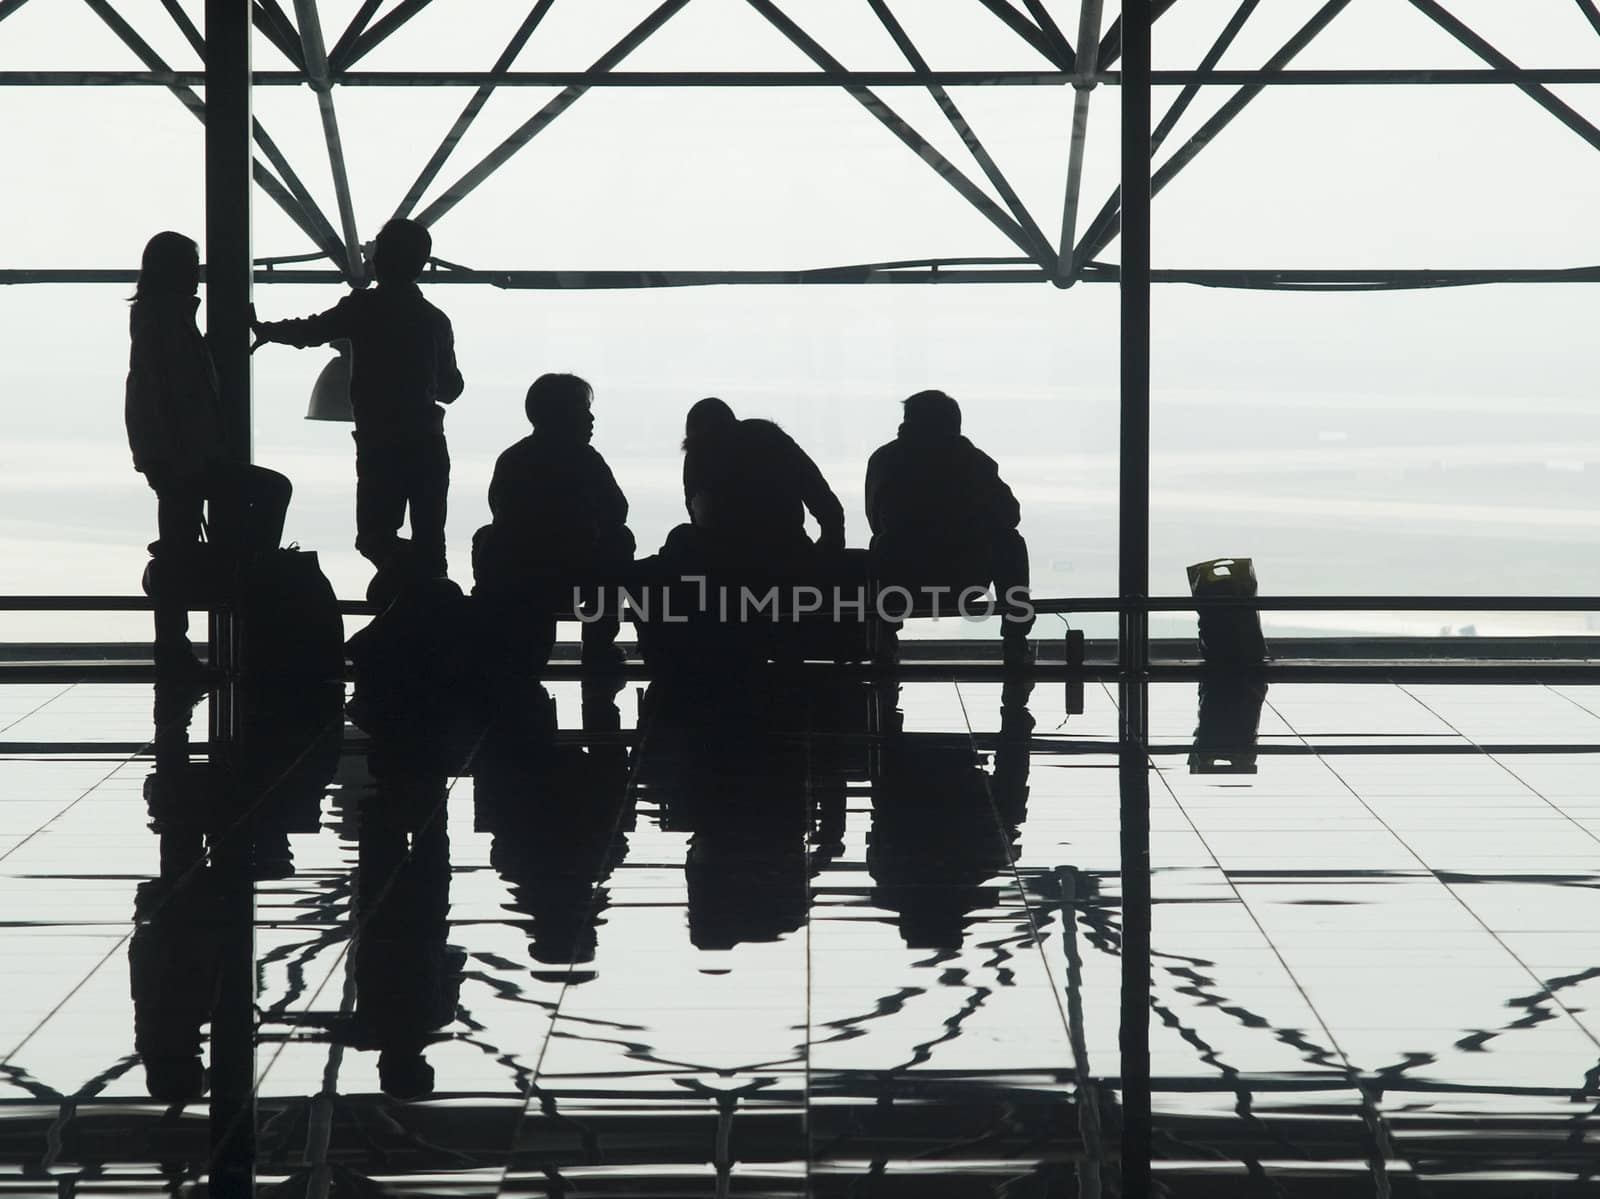 Silhouettes and reflections of passenger waiting at an airport